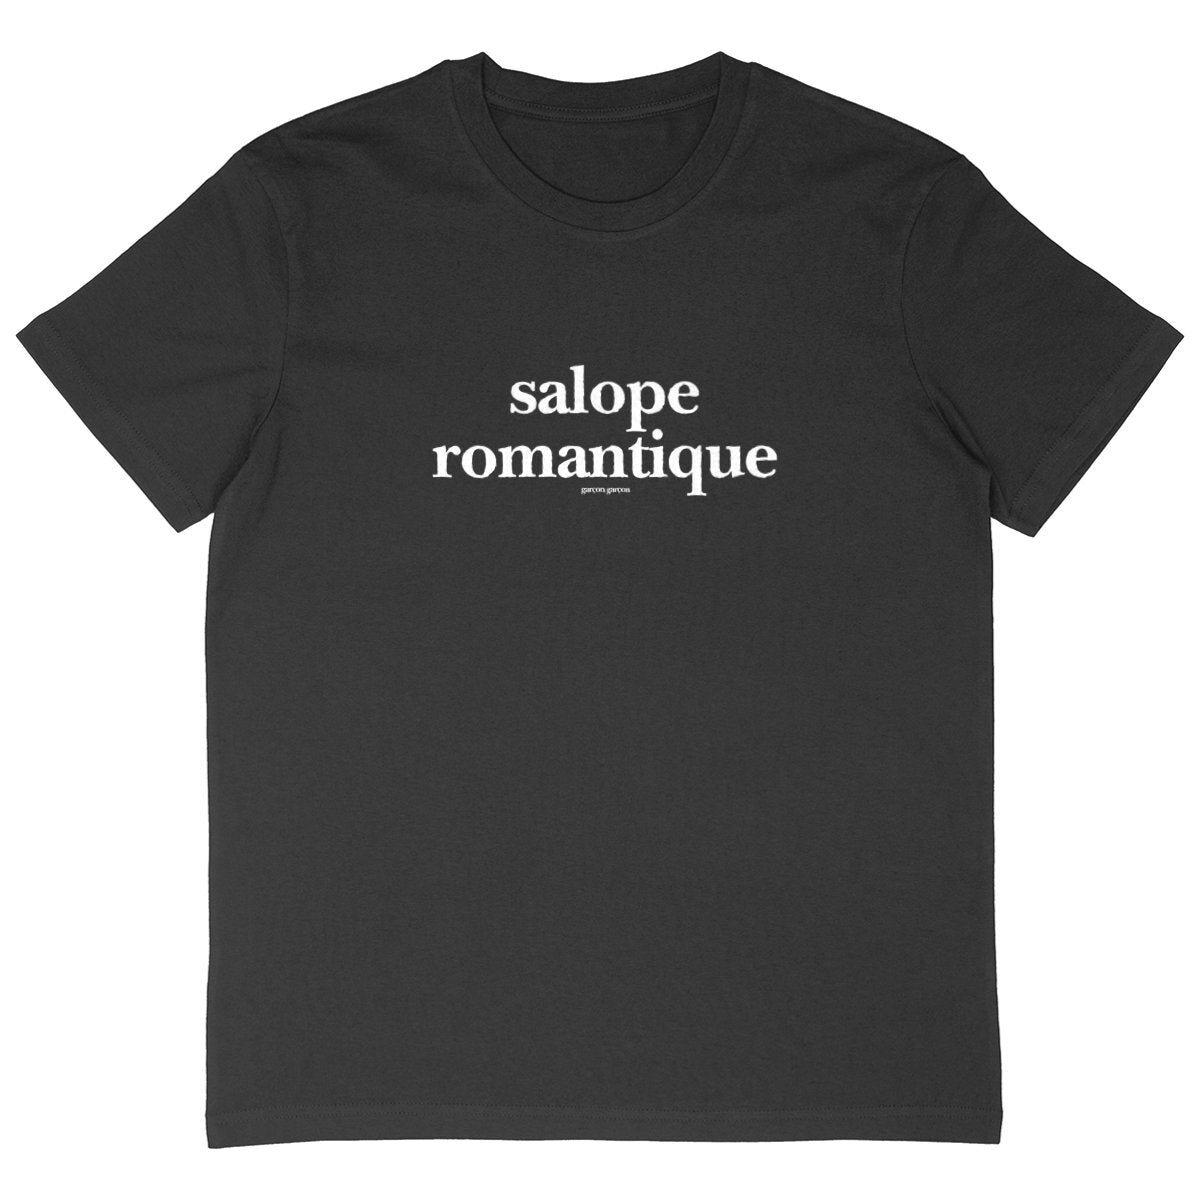 salope romantique BLACK OVERSIZED TEE; BLACK tee oversized.garçon garçon tee oversize BLACK. Dive into the essence of Parisian cool with this oversized tee. The subtle 'garçon garçon' signature whispers a chic narrative, offering a slice of the city's famed elegance. Perfect for those who speak style with simplicity.